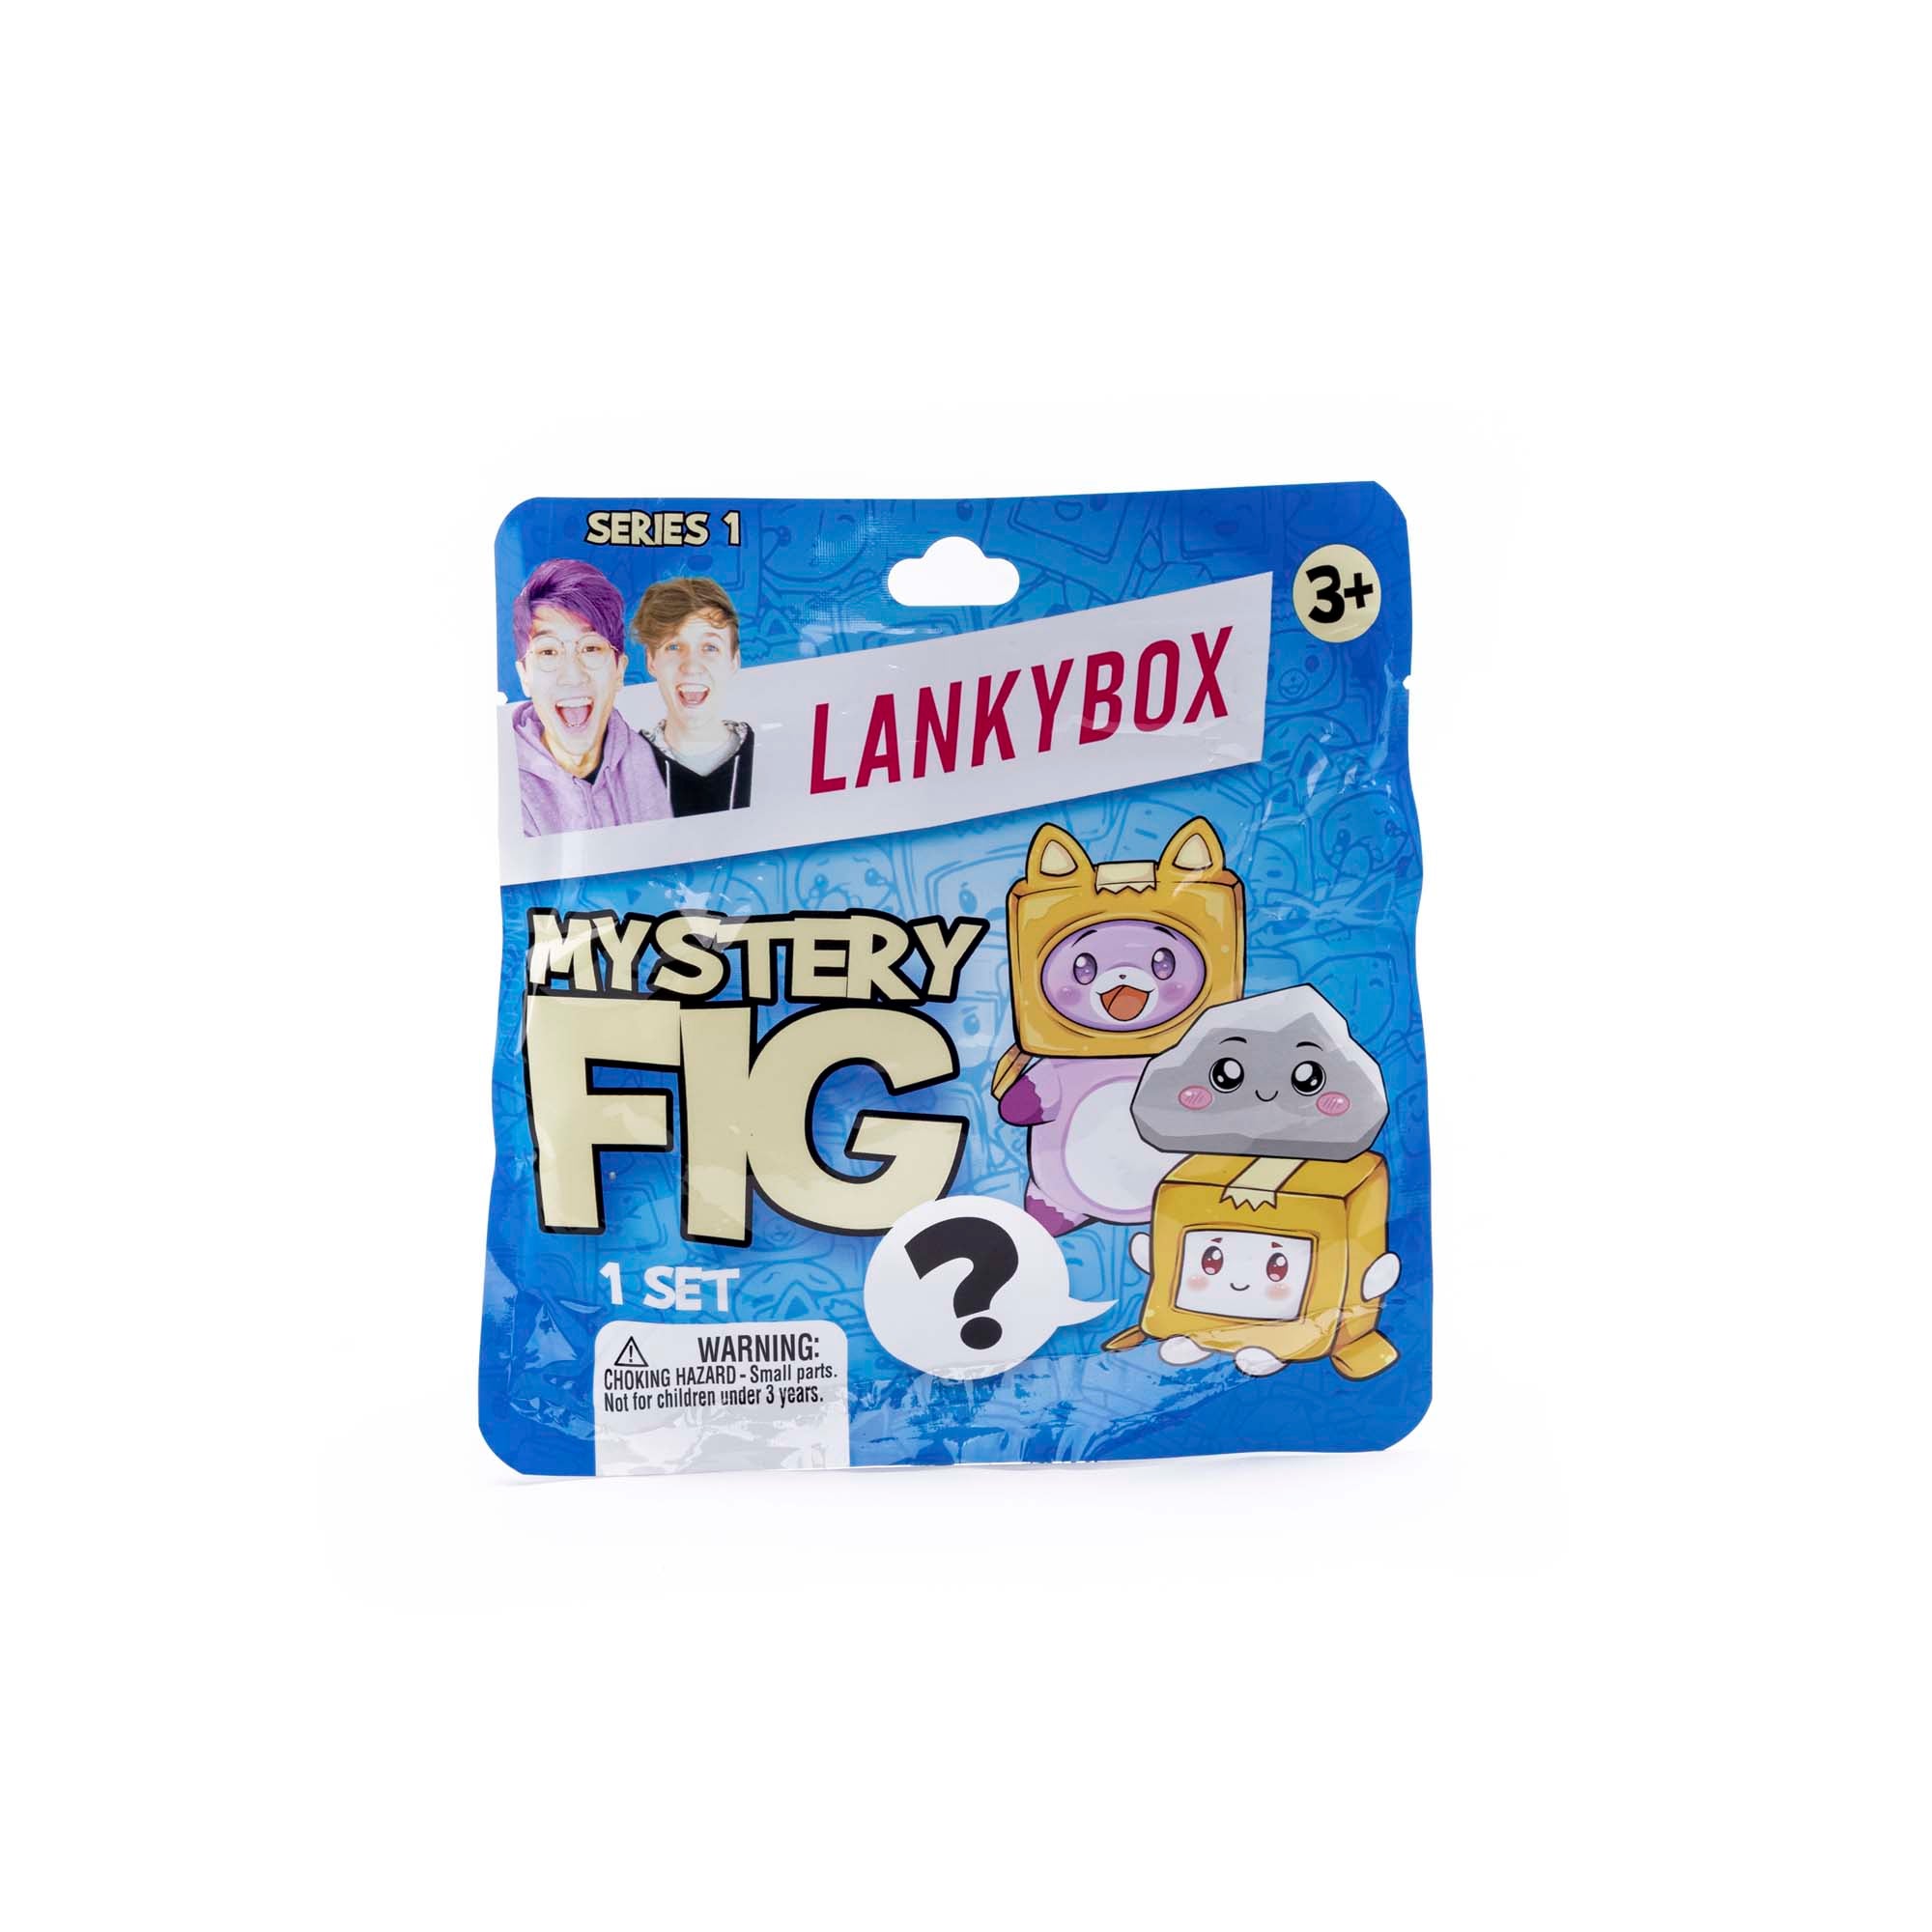 Lanky Box Mystery Figure, Assortment, 1 Count